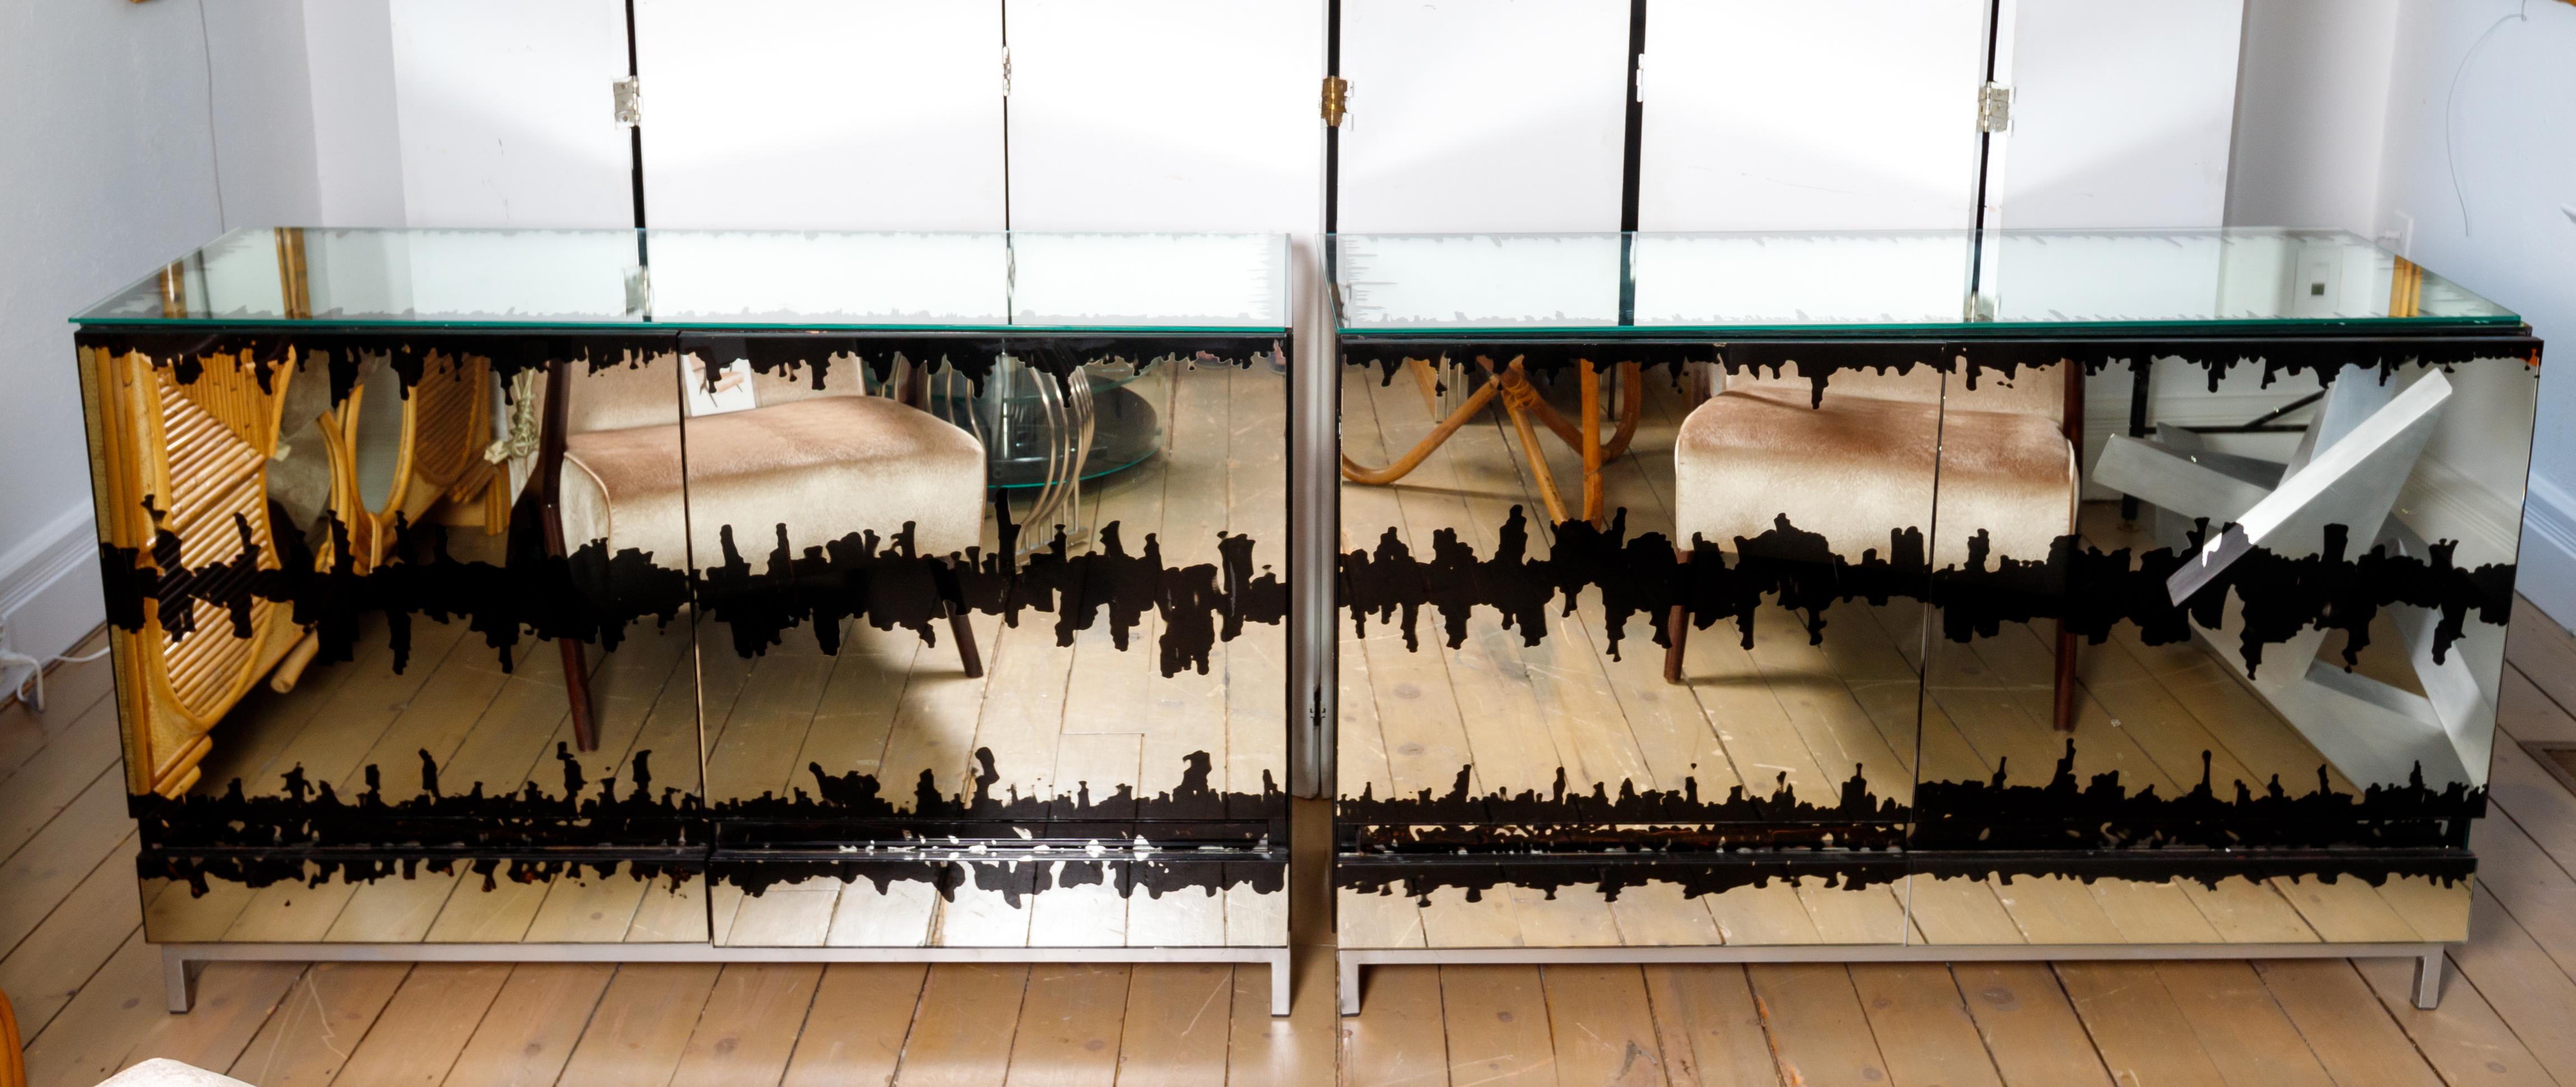 Mirrored verre eglomise cabinet with abstract black design
Two available.